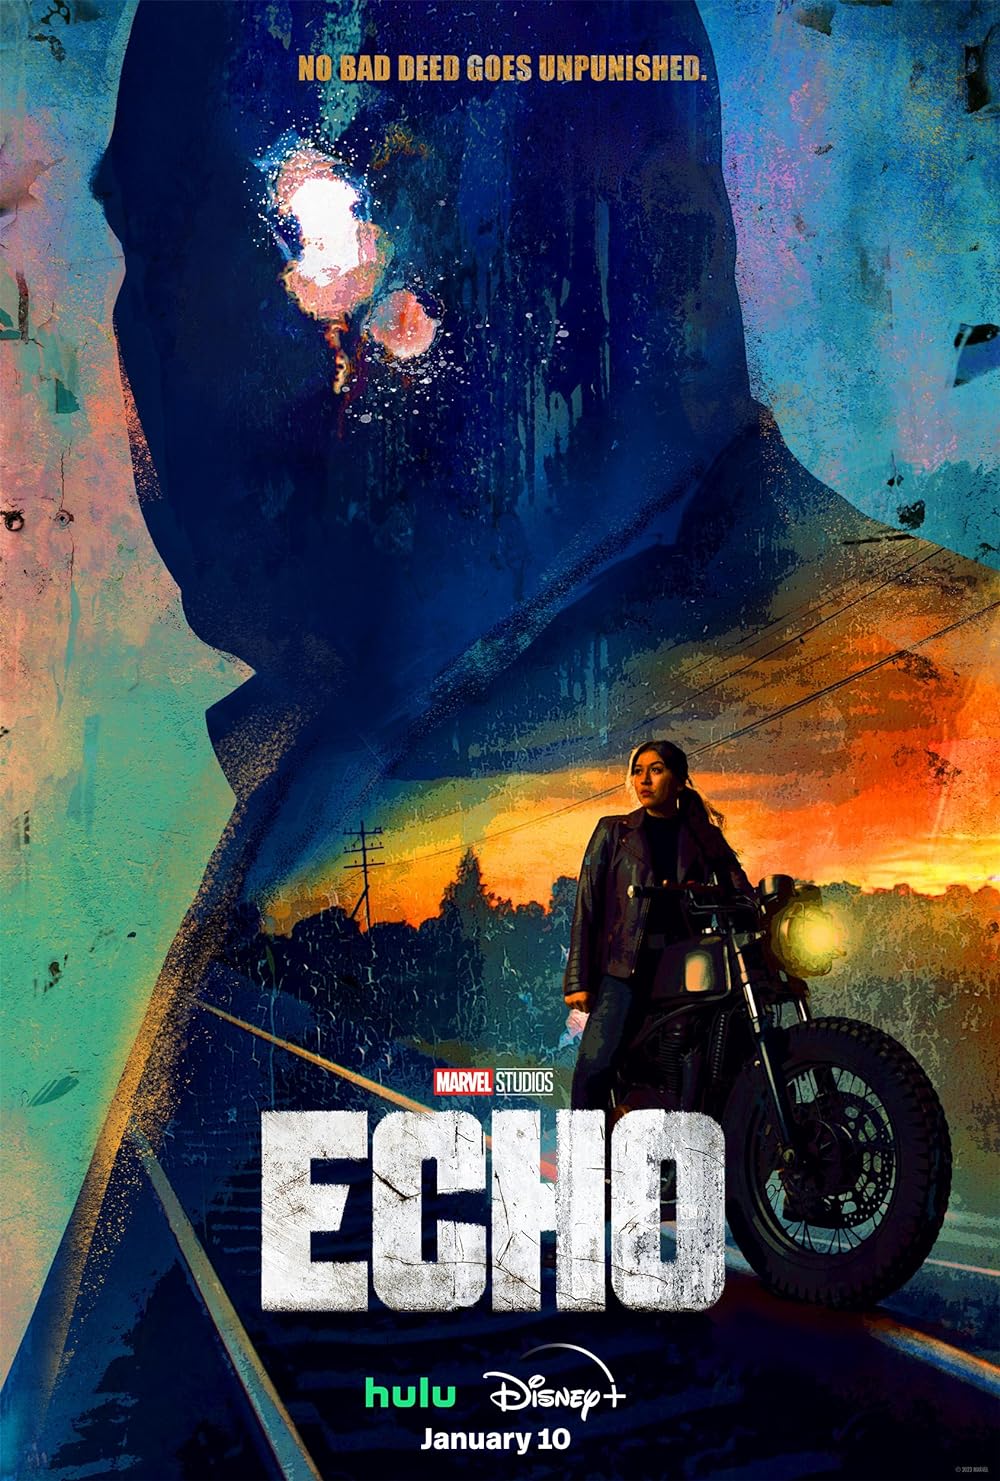 Echo (January 11) - Streaming on [Disney +]
The tenth installment in the Marvel Cinematic Universe television series, 